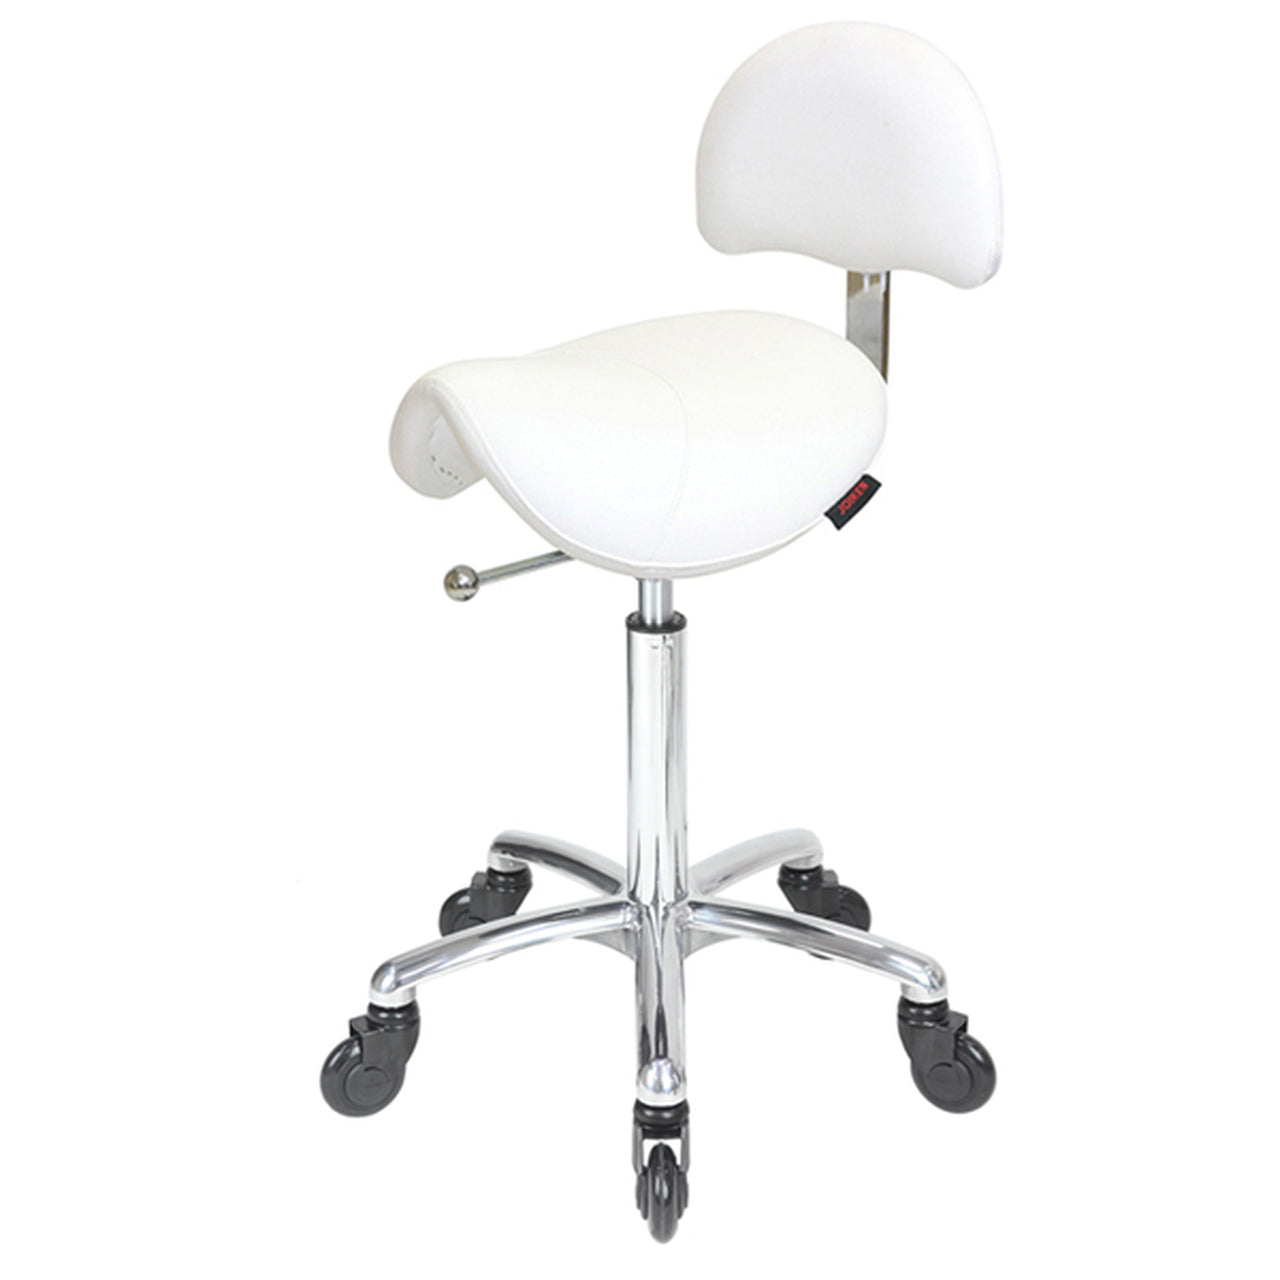 Saddle - With Back - Chrome Base - (White Upholstery)
With CLICK'NCLEAN Castors